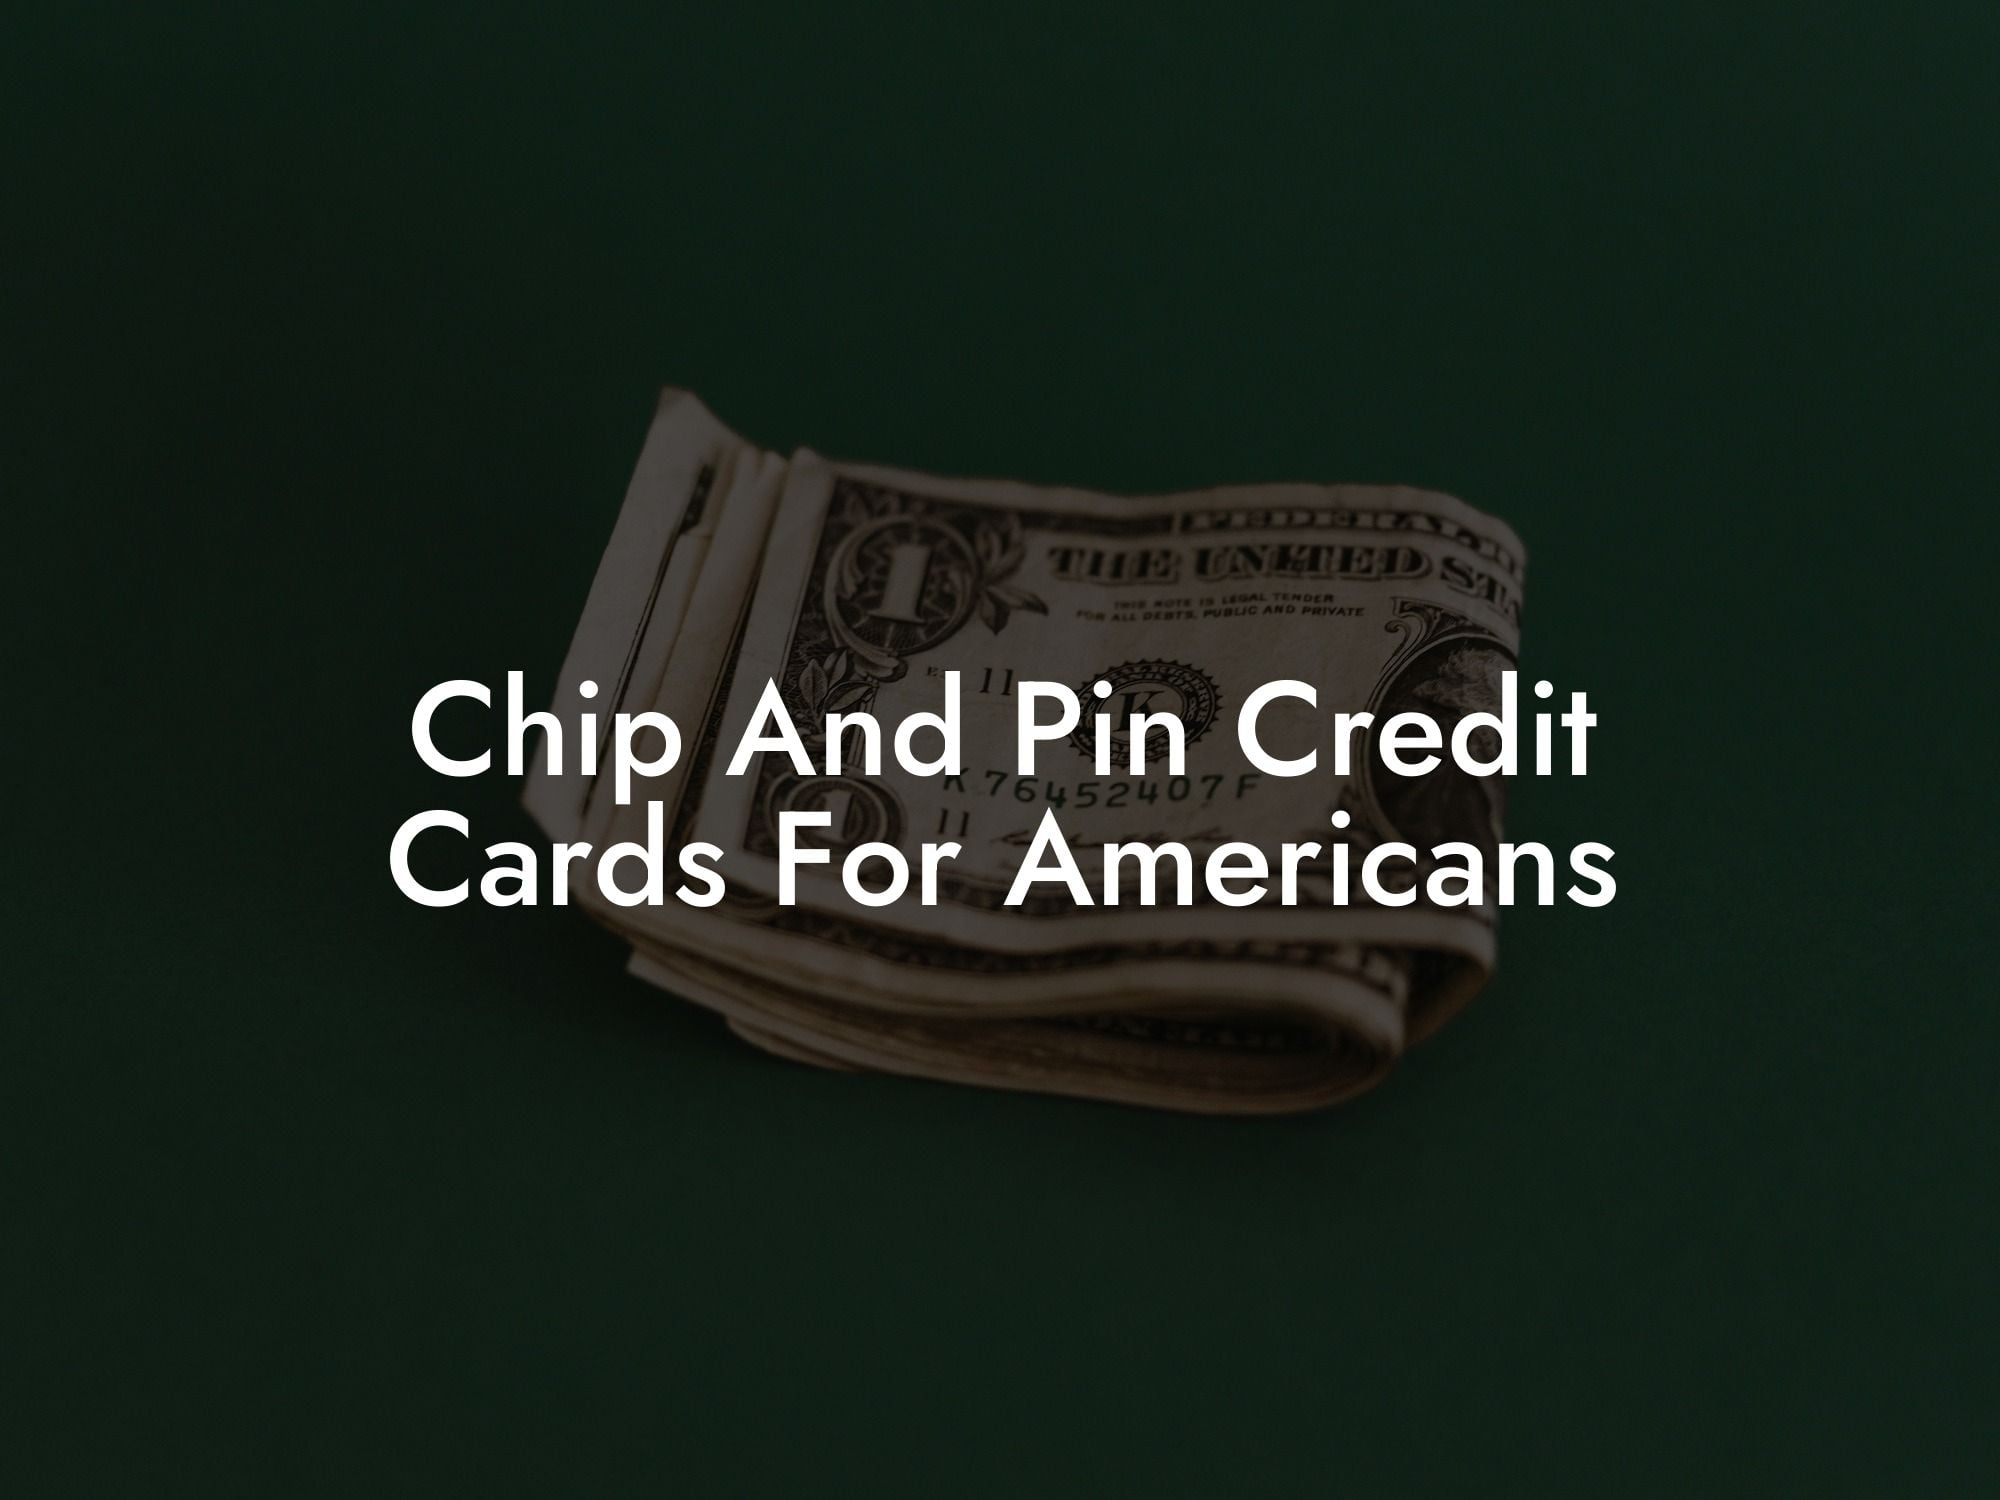 Chip And Pin Credit Cards For Americans